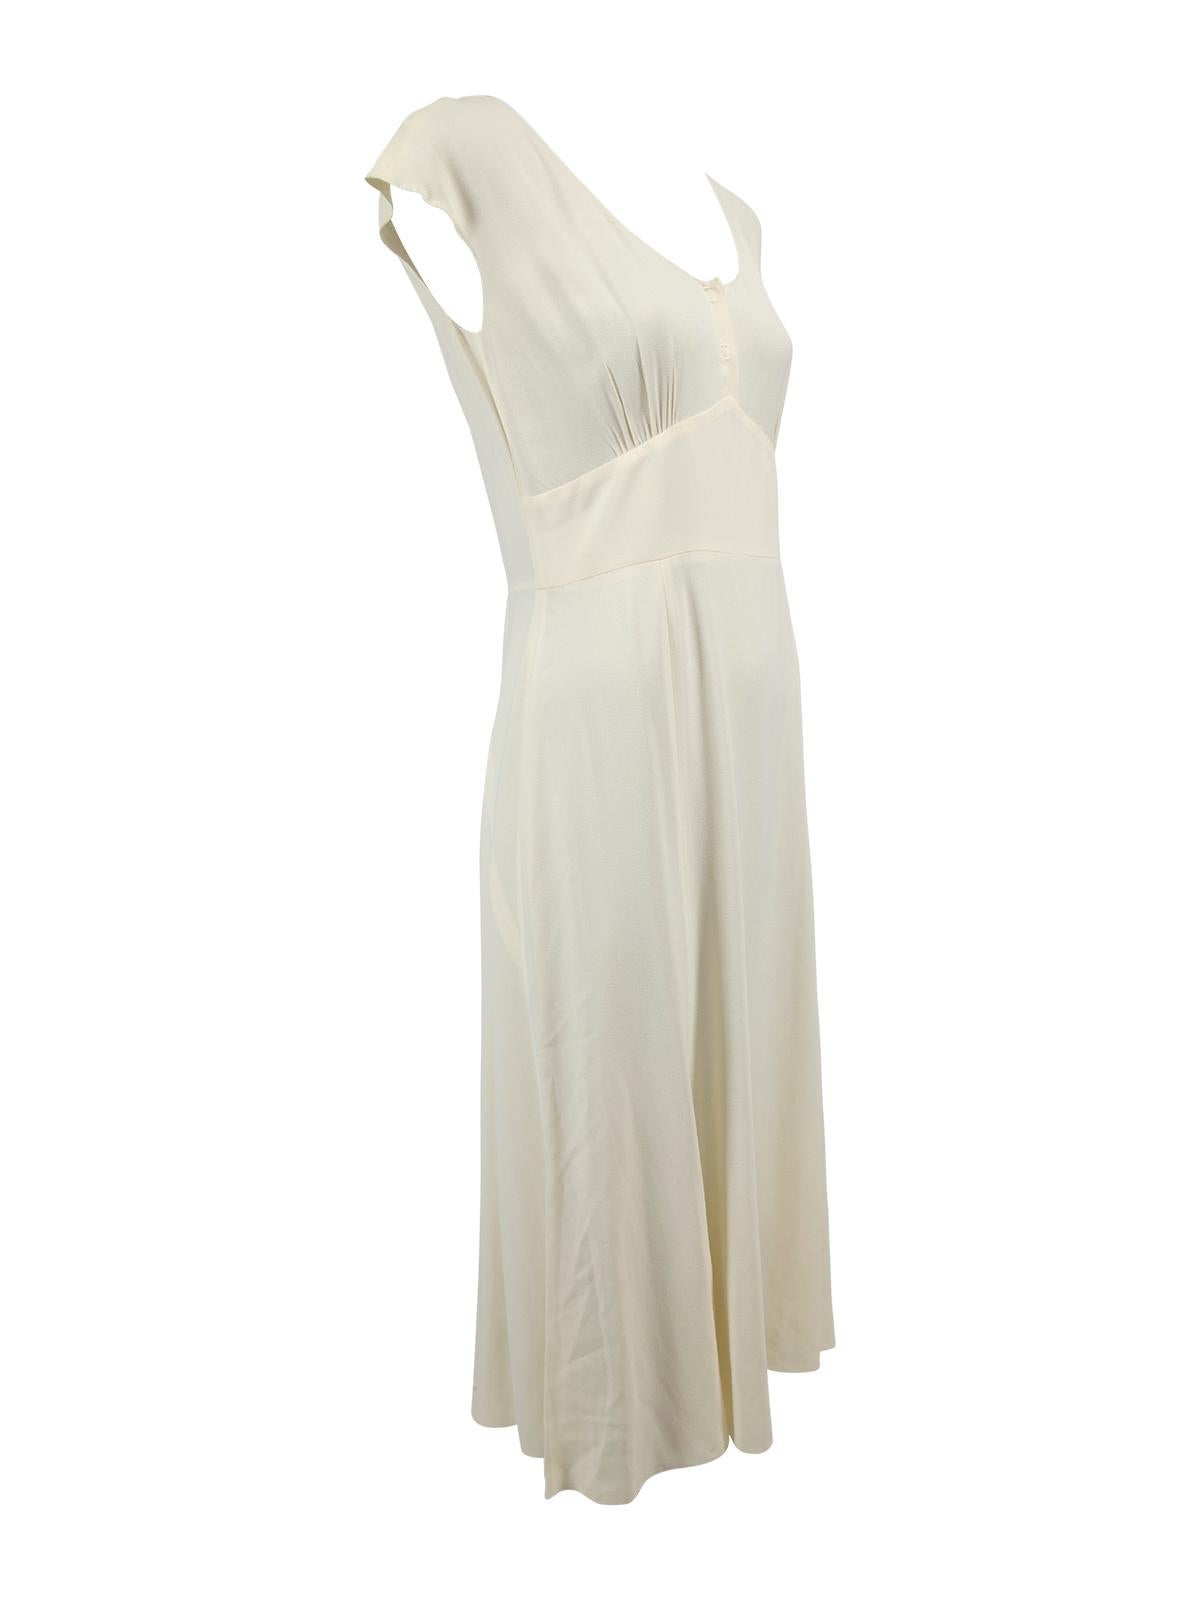 CONDITION is Very good. Hardly any visible wear to dress is evident. Some loose threads can be seen along hemline on this used Prada designer resale item. Details Cream Synthetic Maxi dress Sleeveless Round neckline Snap buttons front opening Side